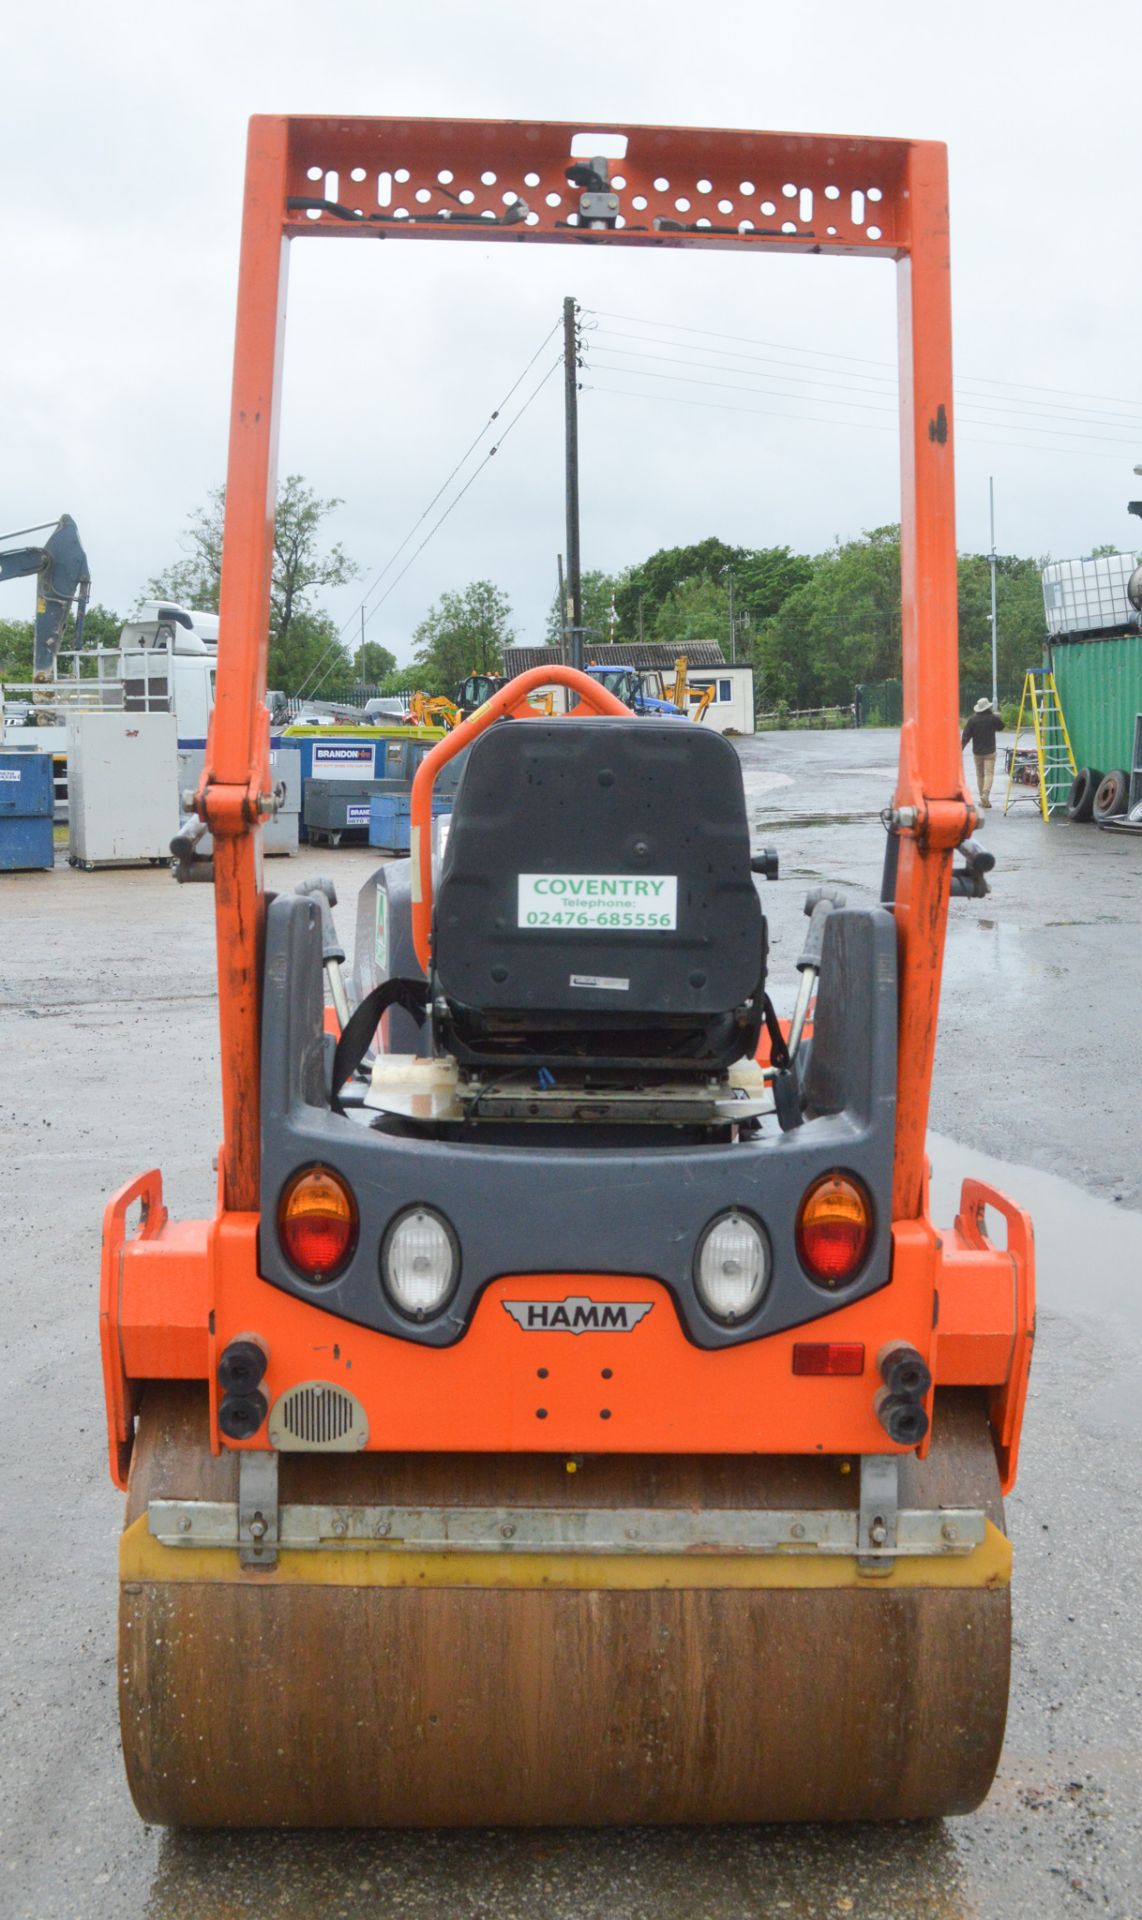 Hamm HD 12 double drum roller  Year: 2014 S/N: 2005369 Recorded Hours: 481 A633770 - Image 6 of 8